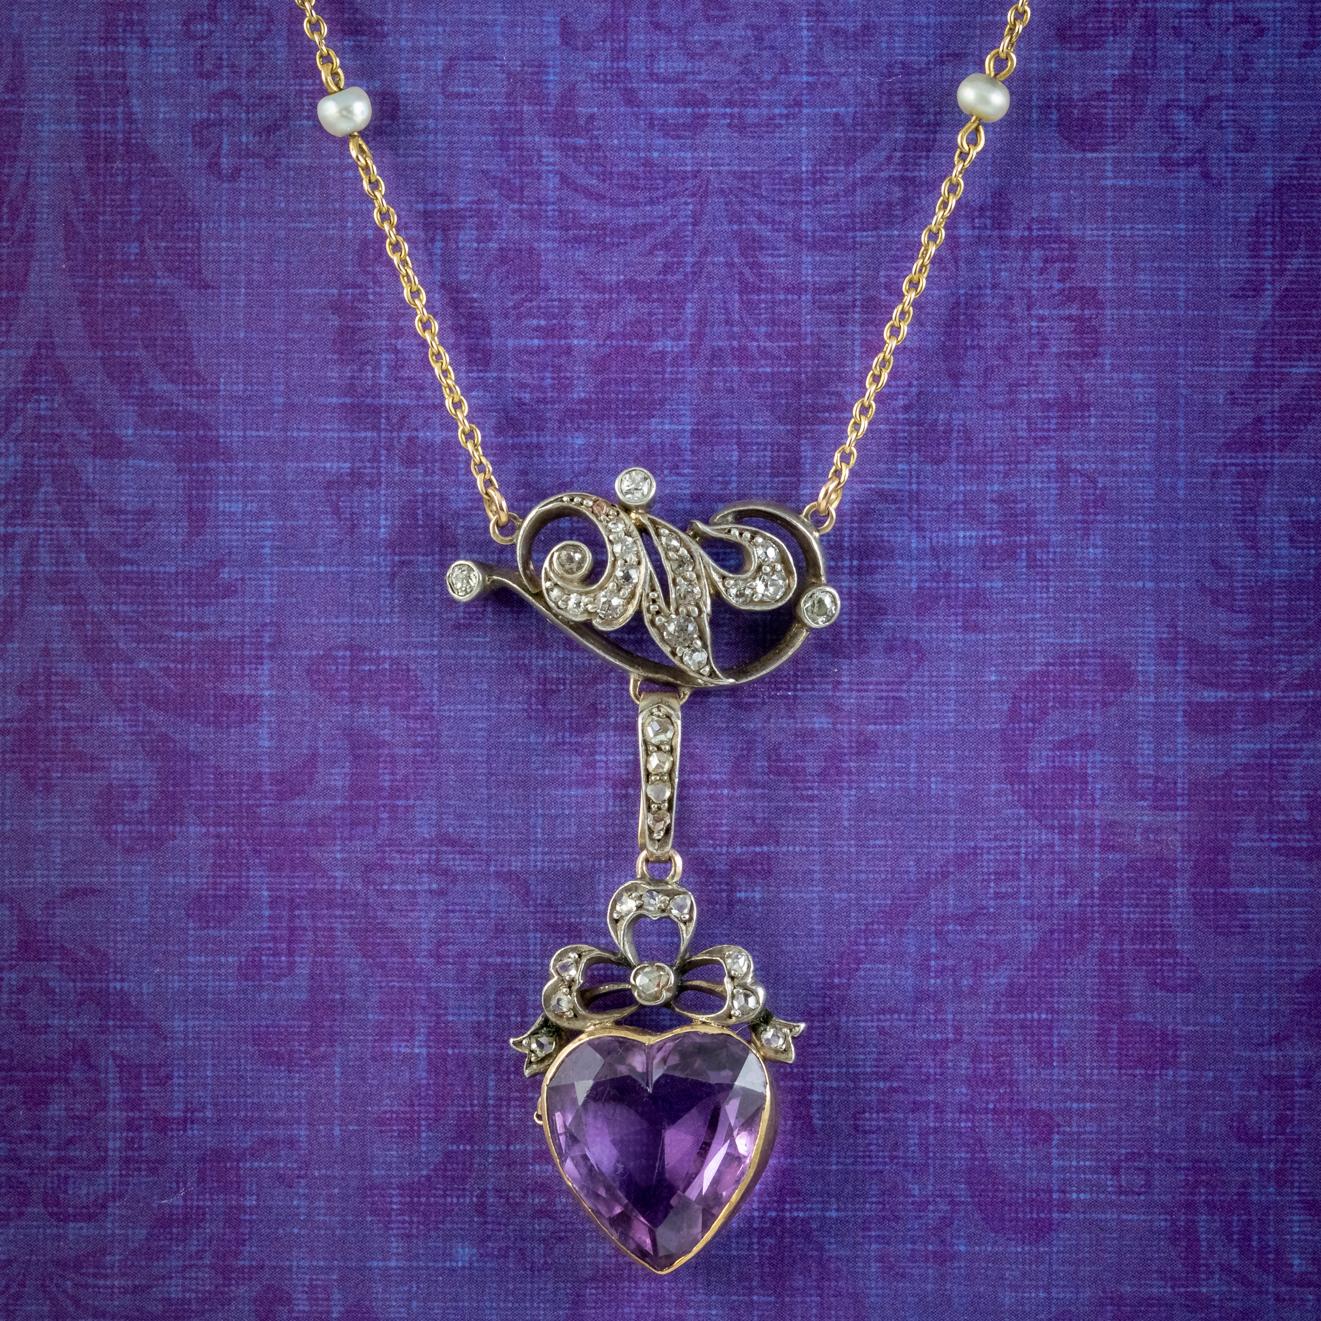 A fabulous Antique late Victorian lavaliere necklace adorned with a beautiful Art Nouveau style pendant decorated with twinkling Diamonds (approx. 1ct total) and a large Amethyst heart at the bottom weighing approx. 10ct.

The pendant consists of a